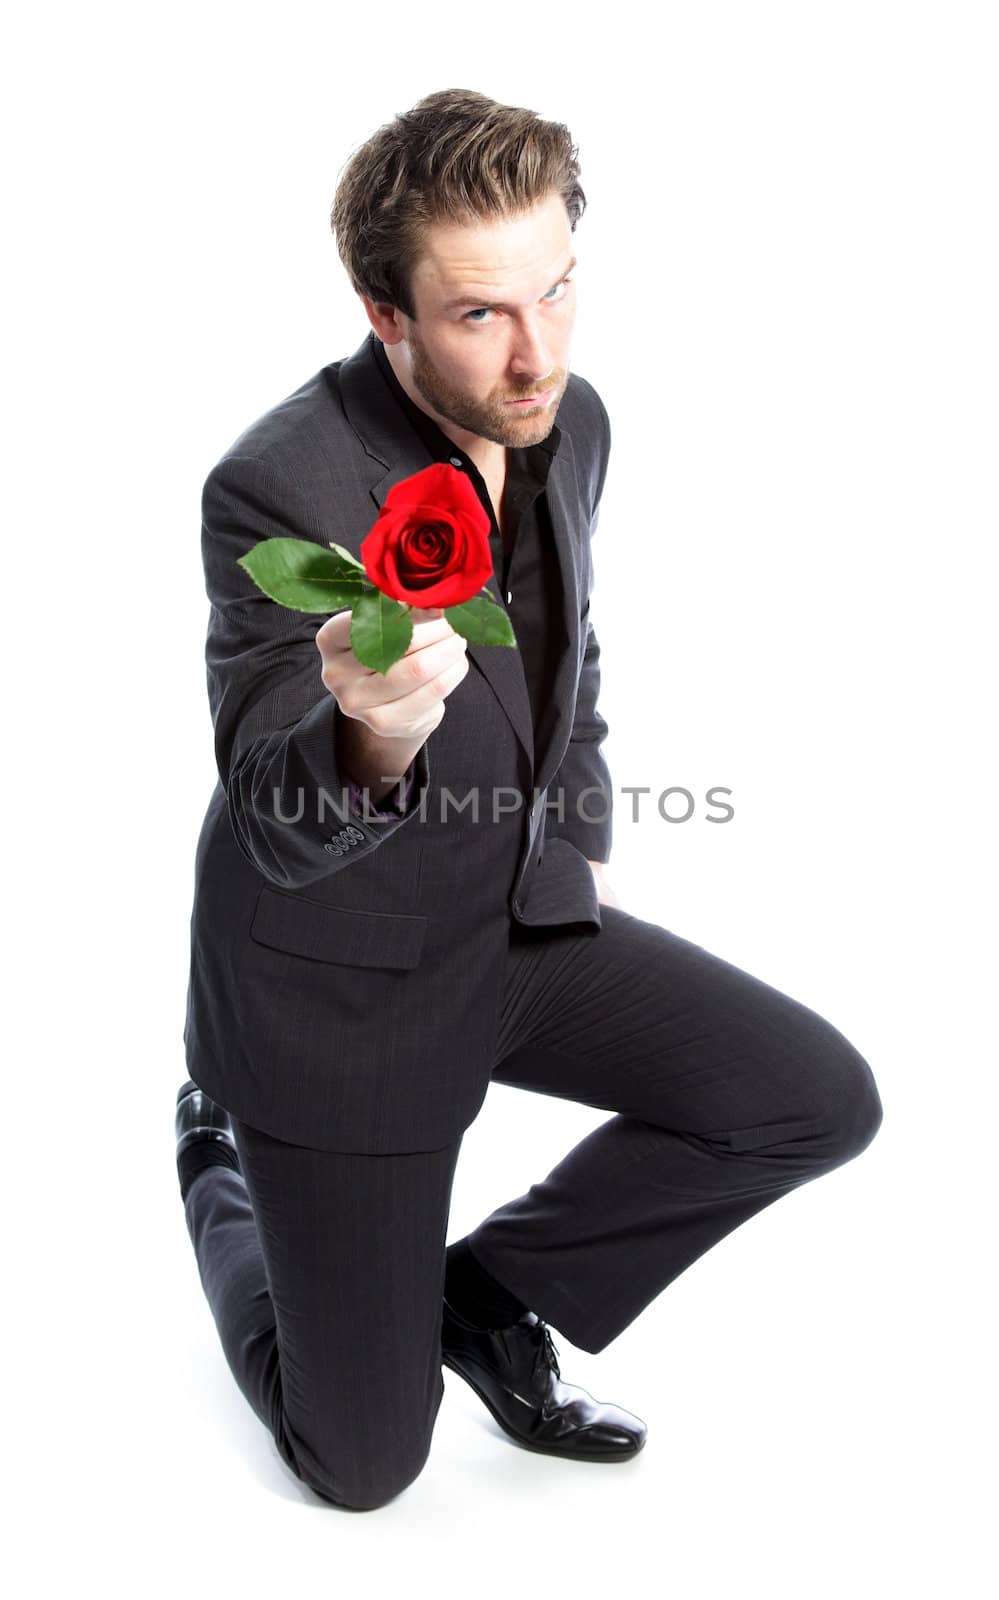 Attractive 30 years old caucasion man shot in studio isolated on a white background